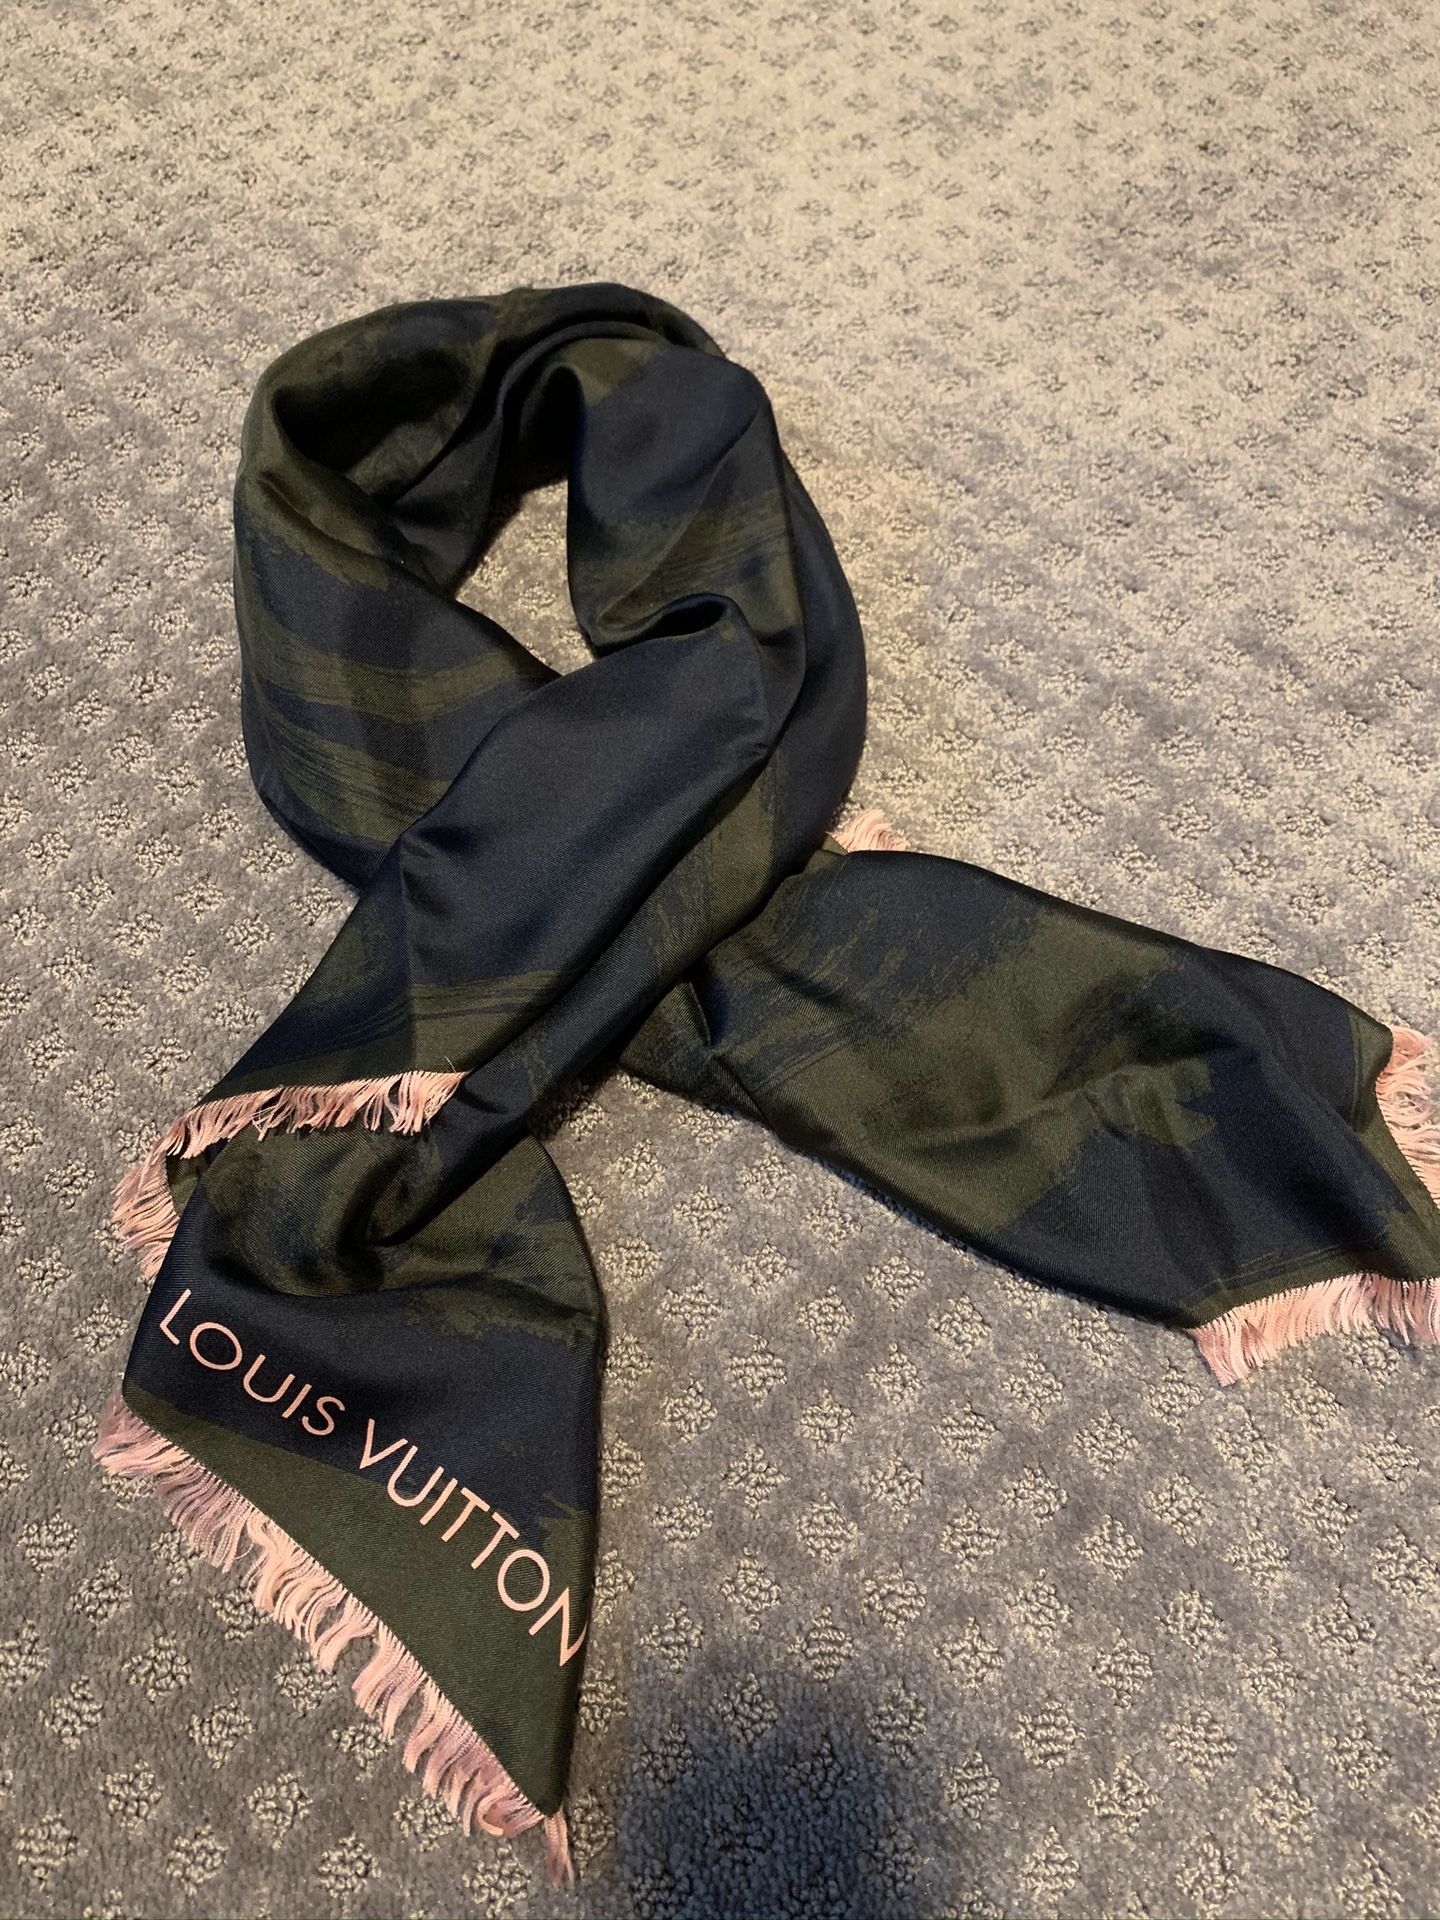 Louis Vuitton authentic silk scarf. Beautiful green and black design with pink frayed trim. 36" x 36"